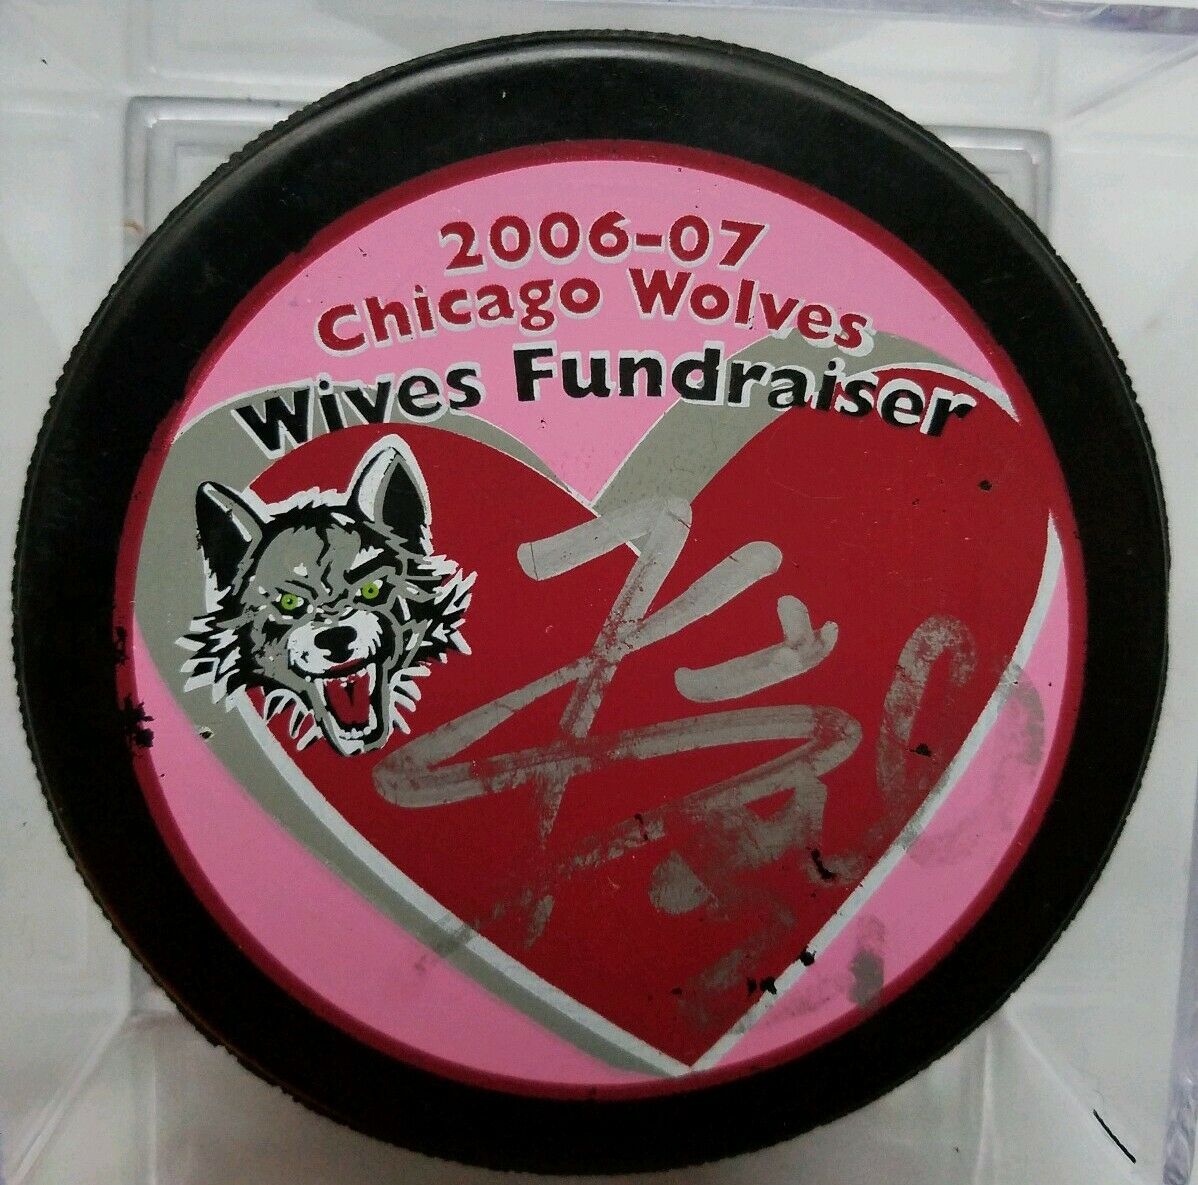 Kevin Doell 2006-07 Chicago Wolves Wives Fundraiser Official Hockey Puck Canada